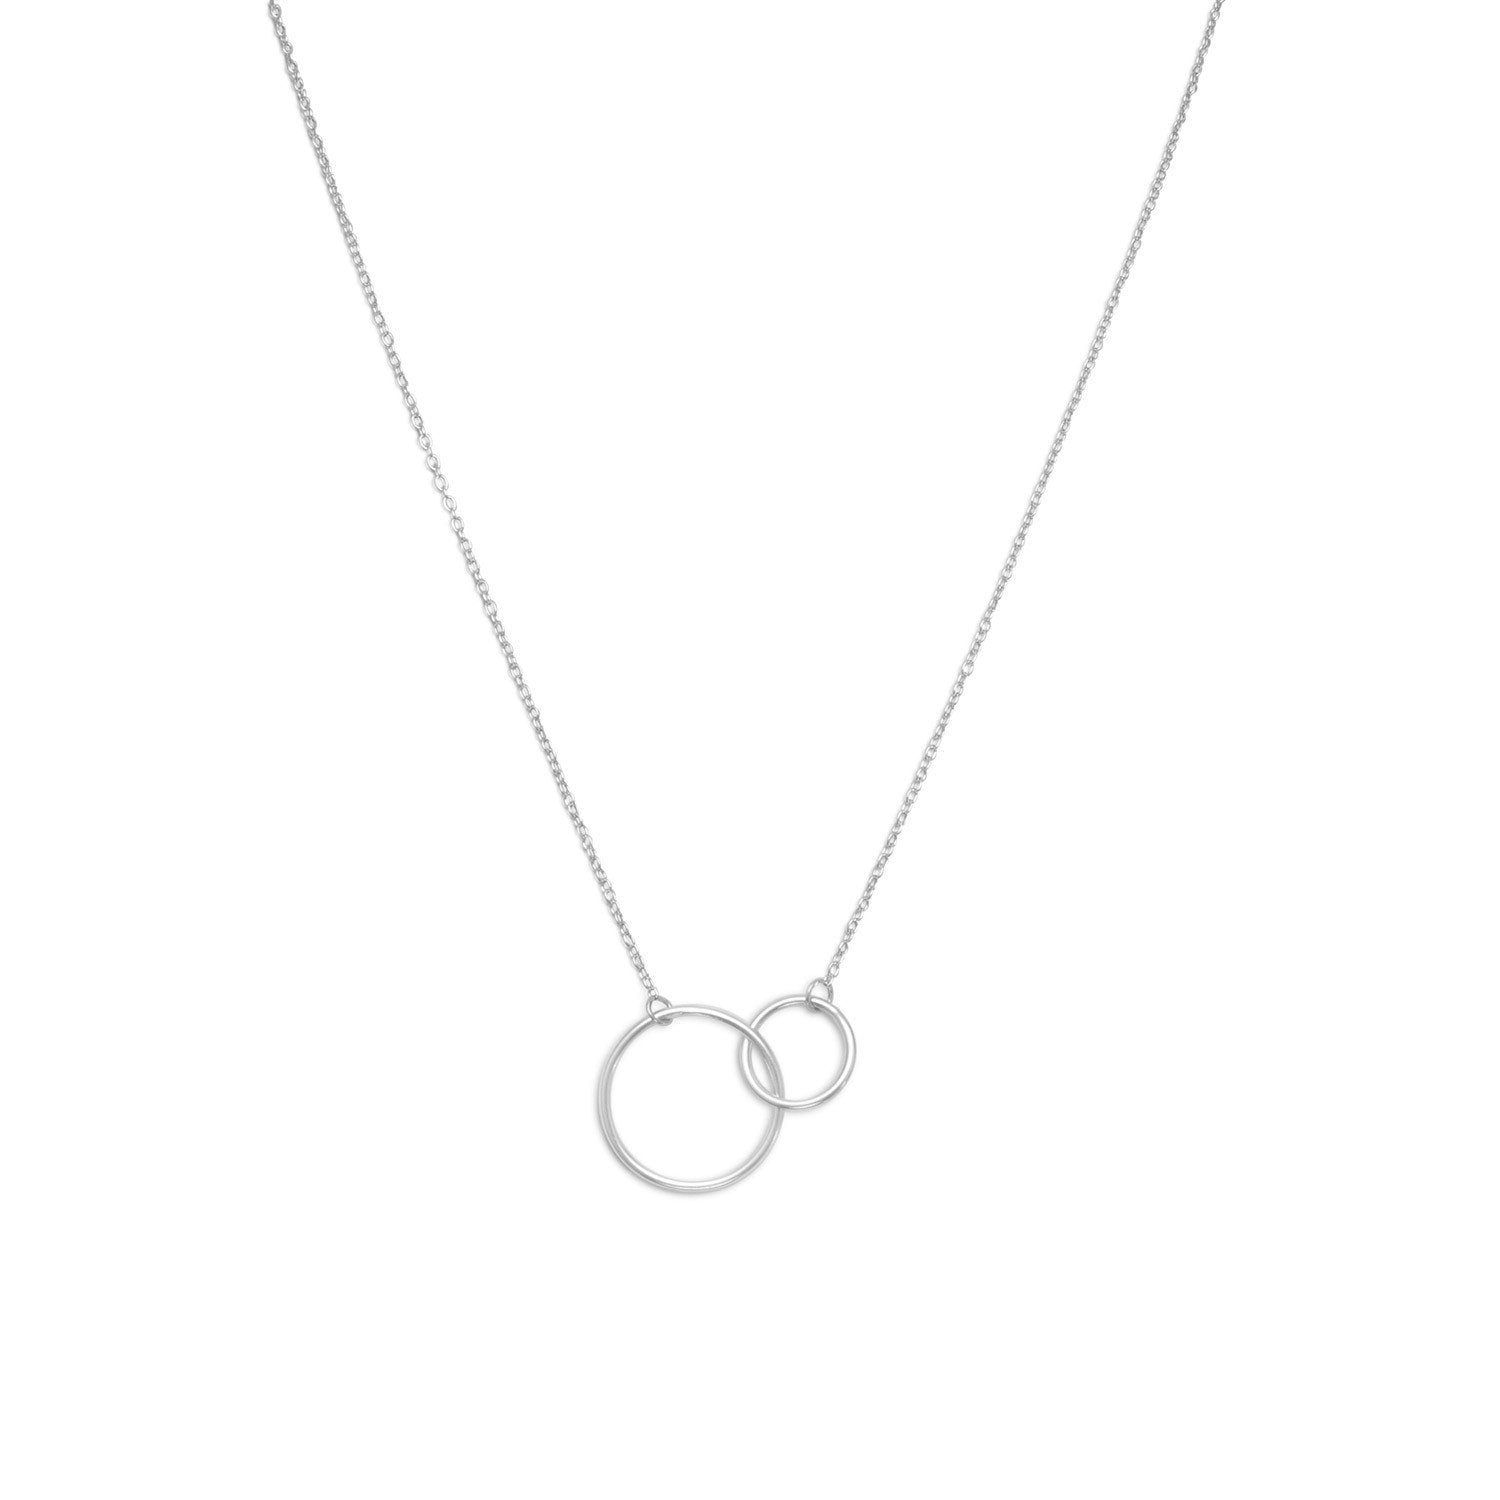 16" + 2" Circle Link Necklace